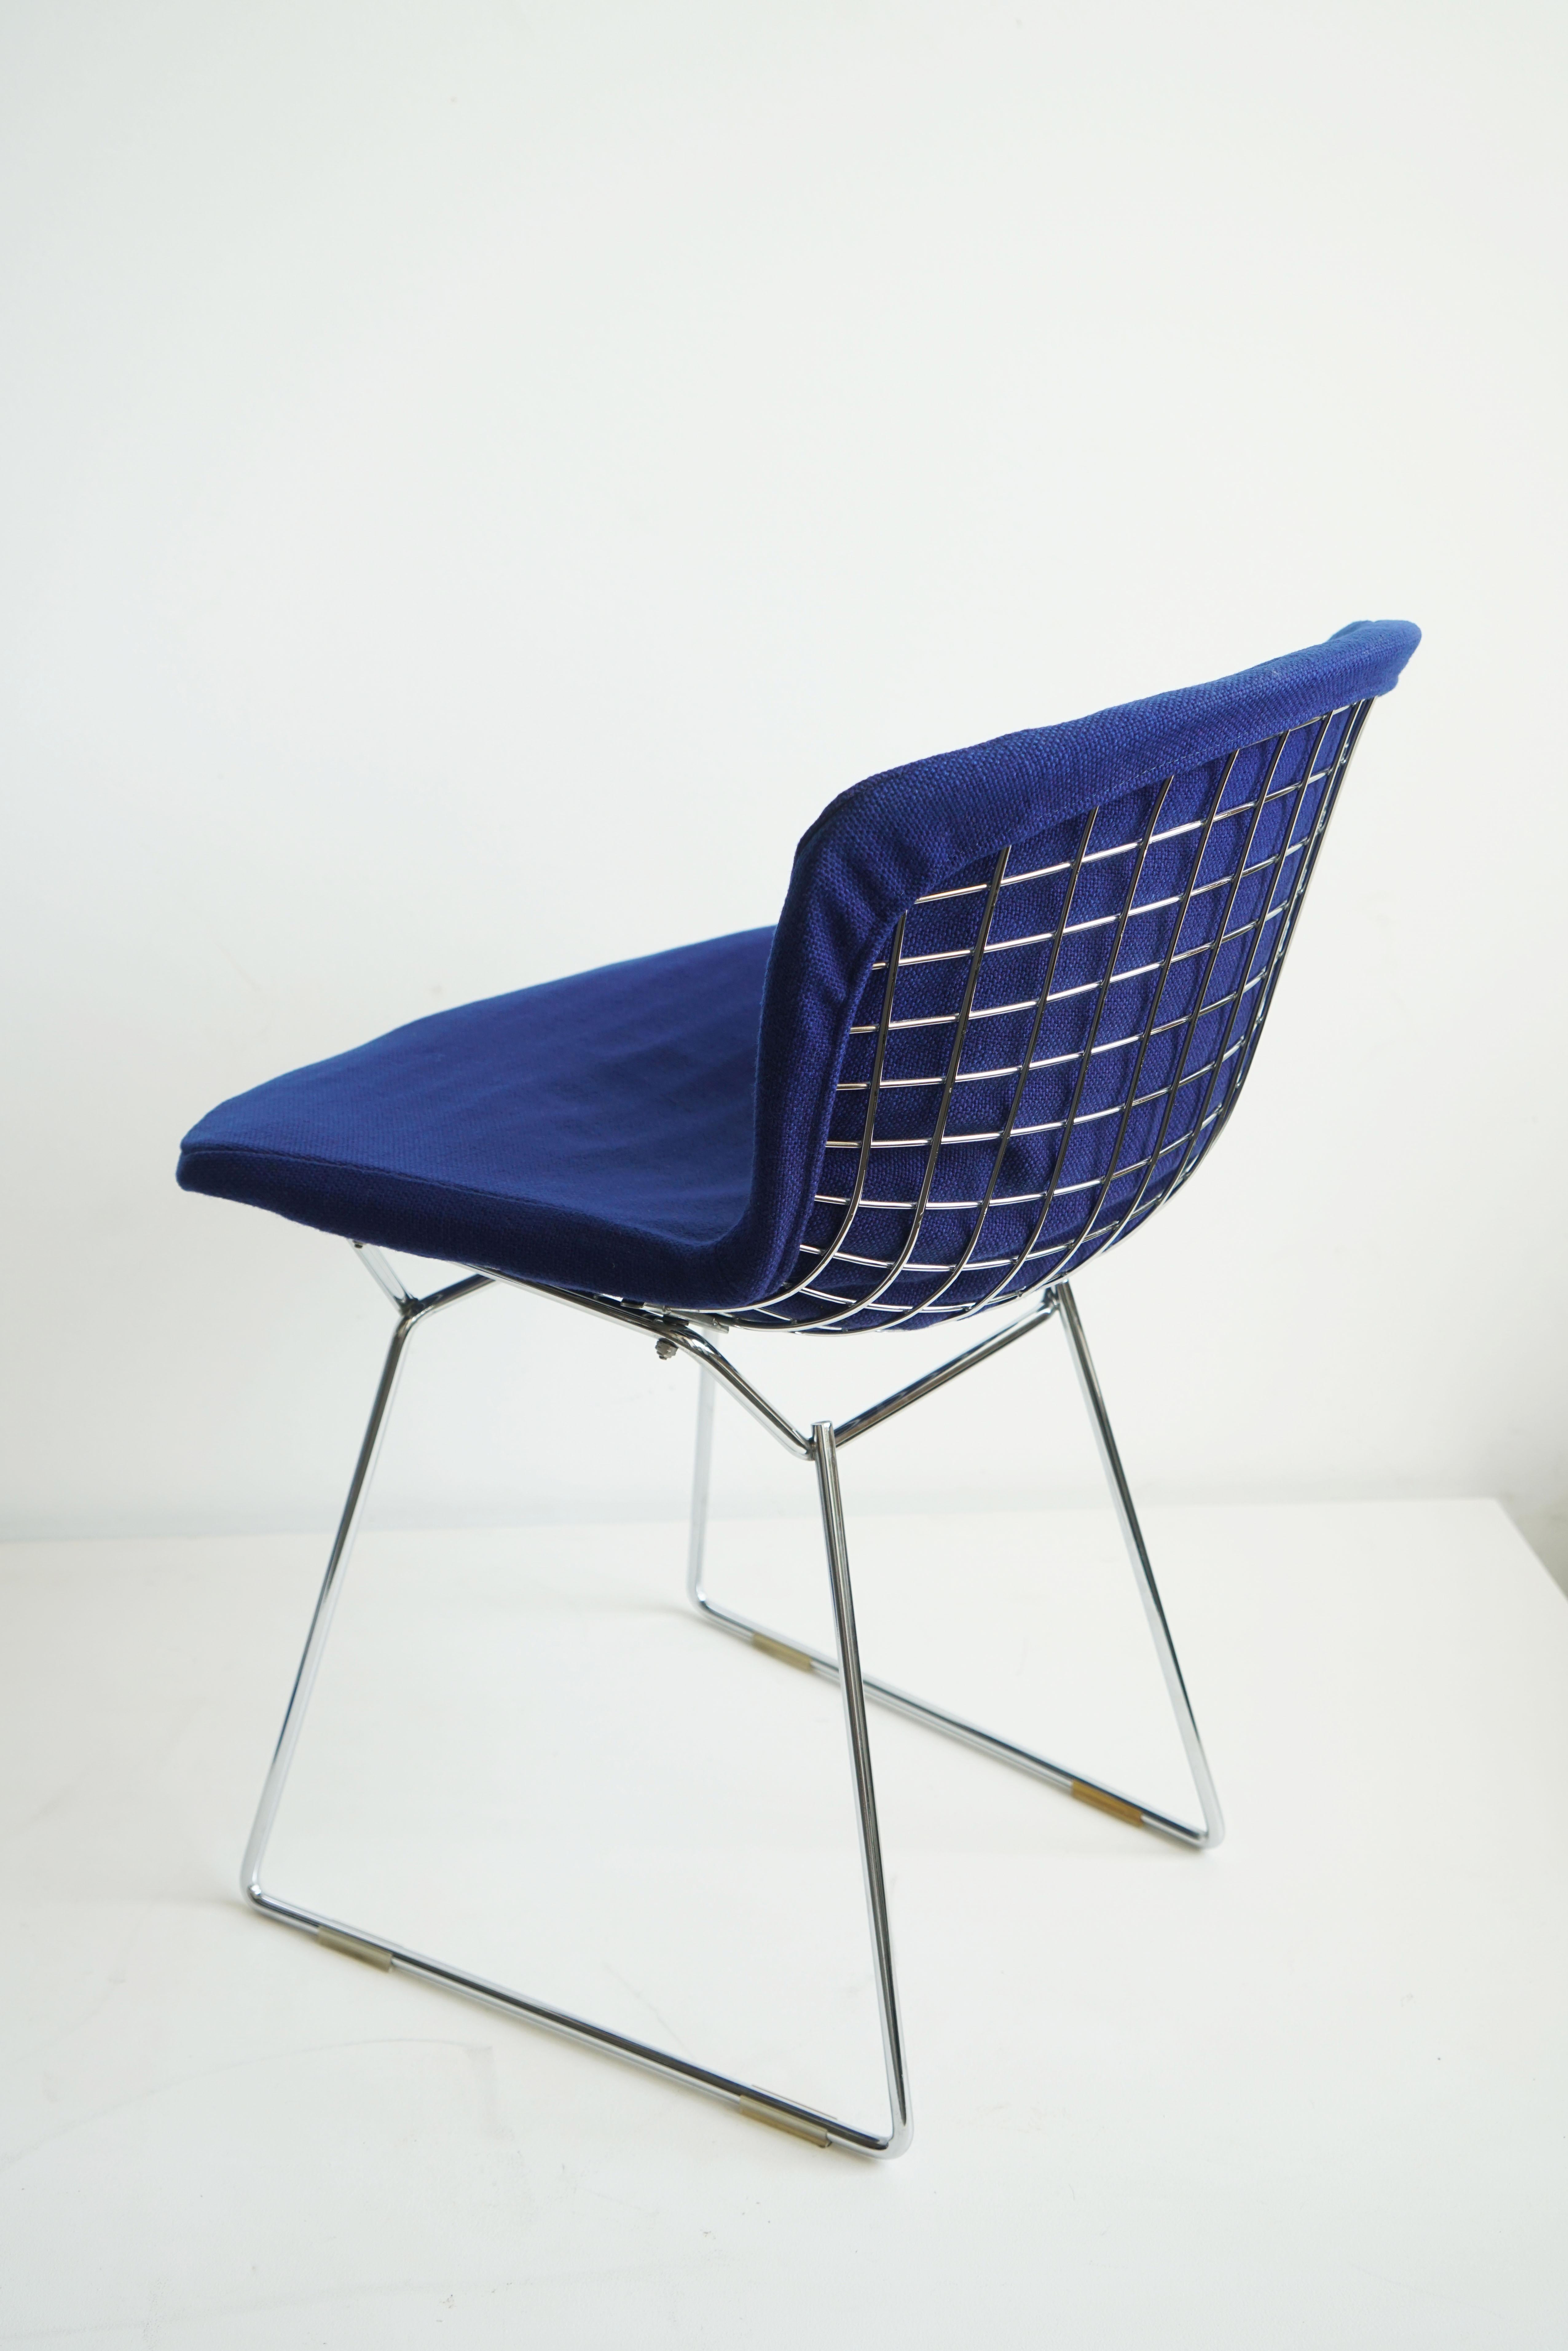 Harry Bertoia side chairs by Knoll with original upholstery, mint 1970's In Good Condition For Sale In Chicago, IL